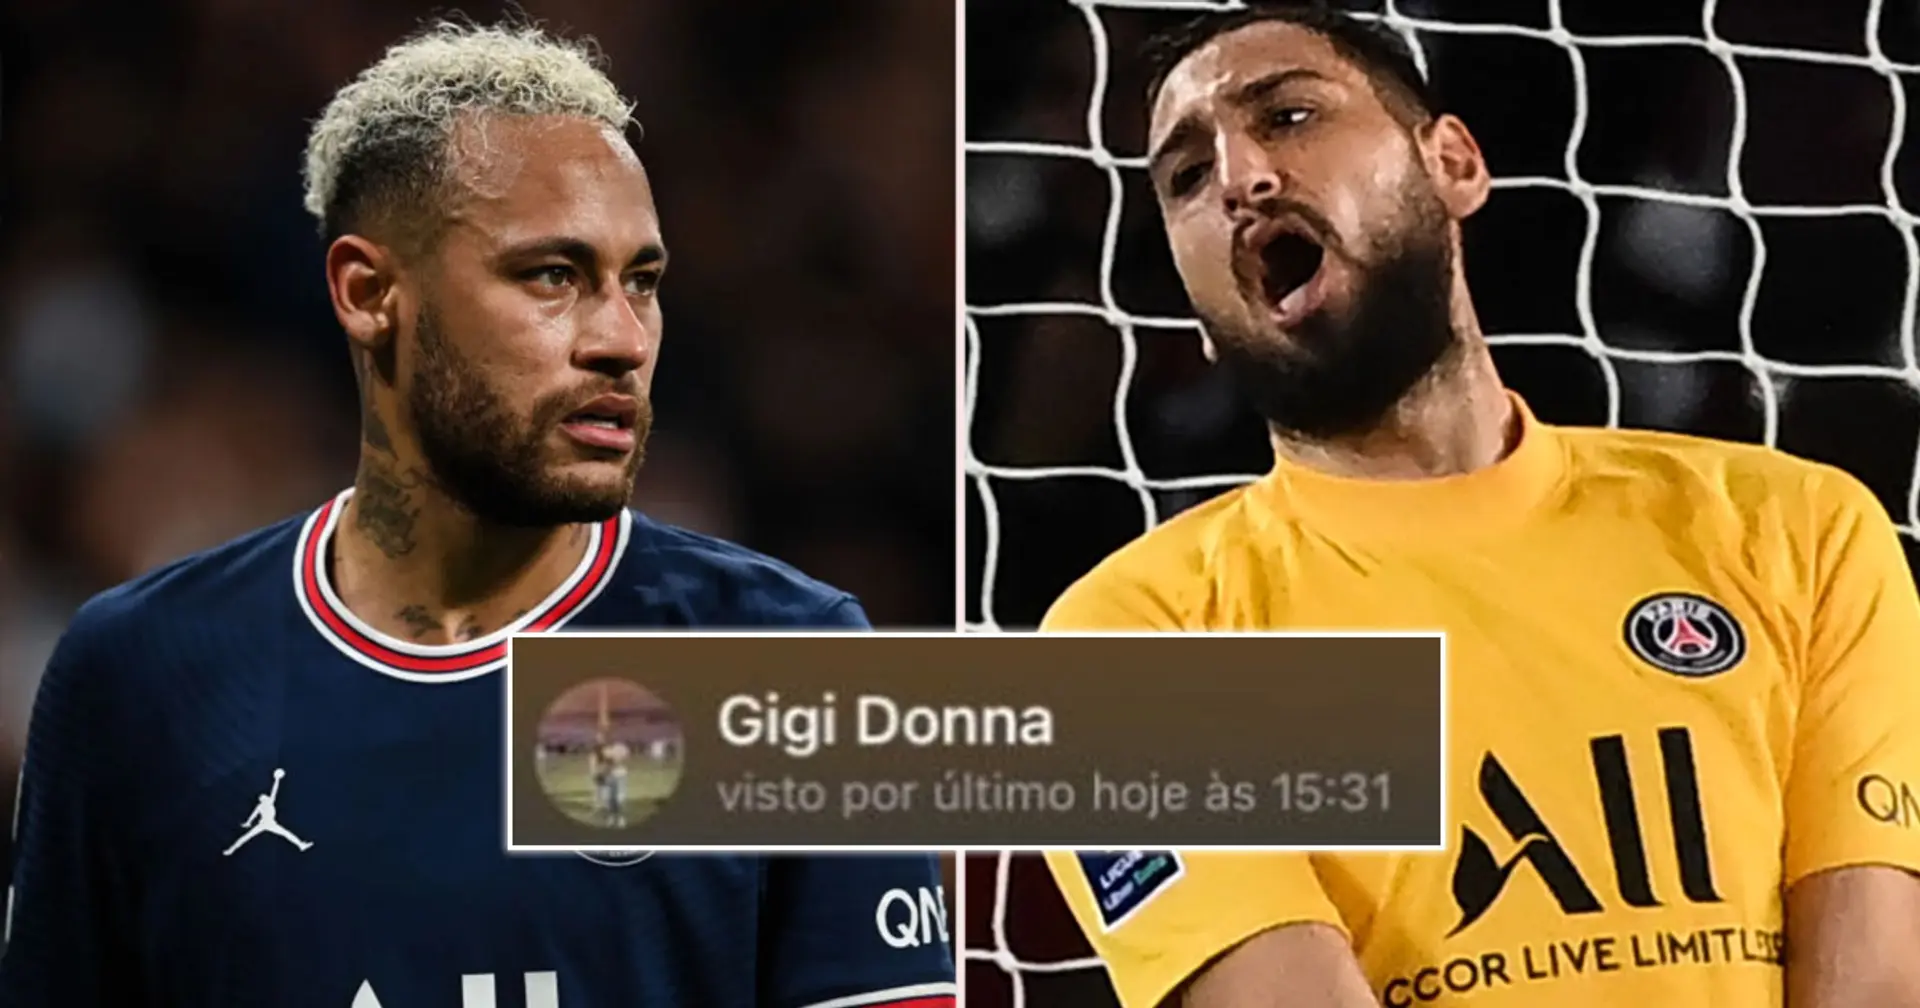 Neymar reveals private conversation with Gianluigi Donnarumma amid rumoured 'bust-up' after Real Madrid loss